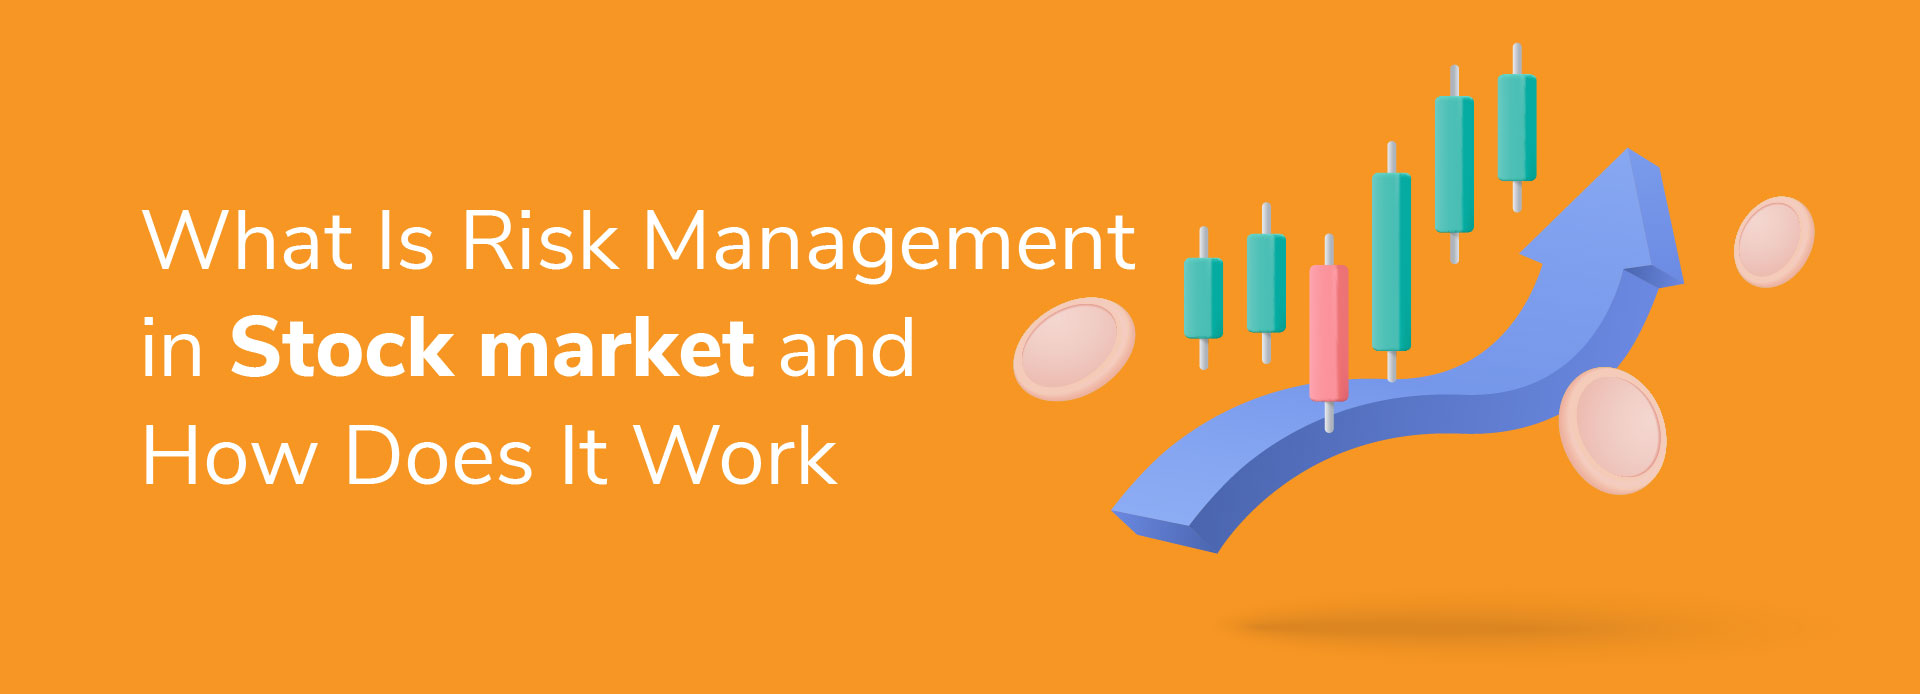 What is risk management in the stock market and how does it work?